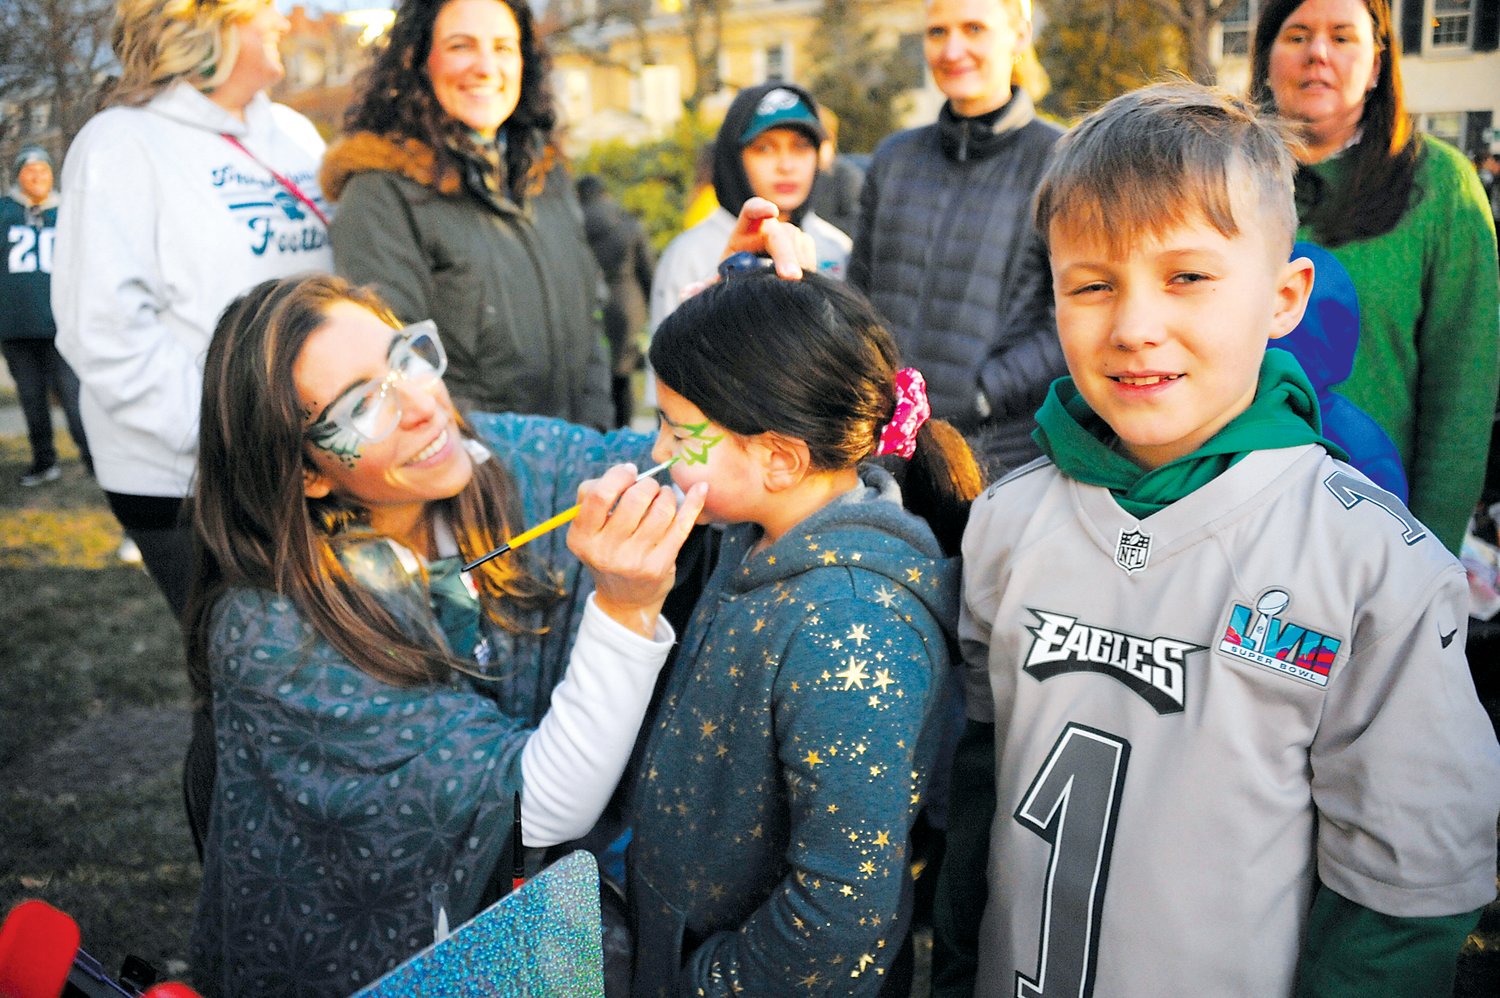 Julie Druzak, of Once Upon A Dream Princess Parties, paints the face of a young Eagles fan at the Herald’s “Bucks County Loves the Birds” pep rally on the lawn of the old county courthouse in Doylestown.